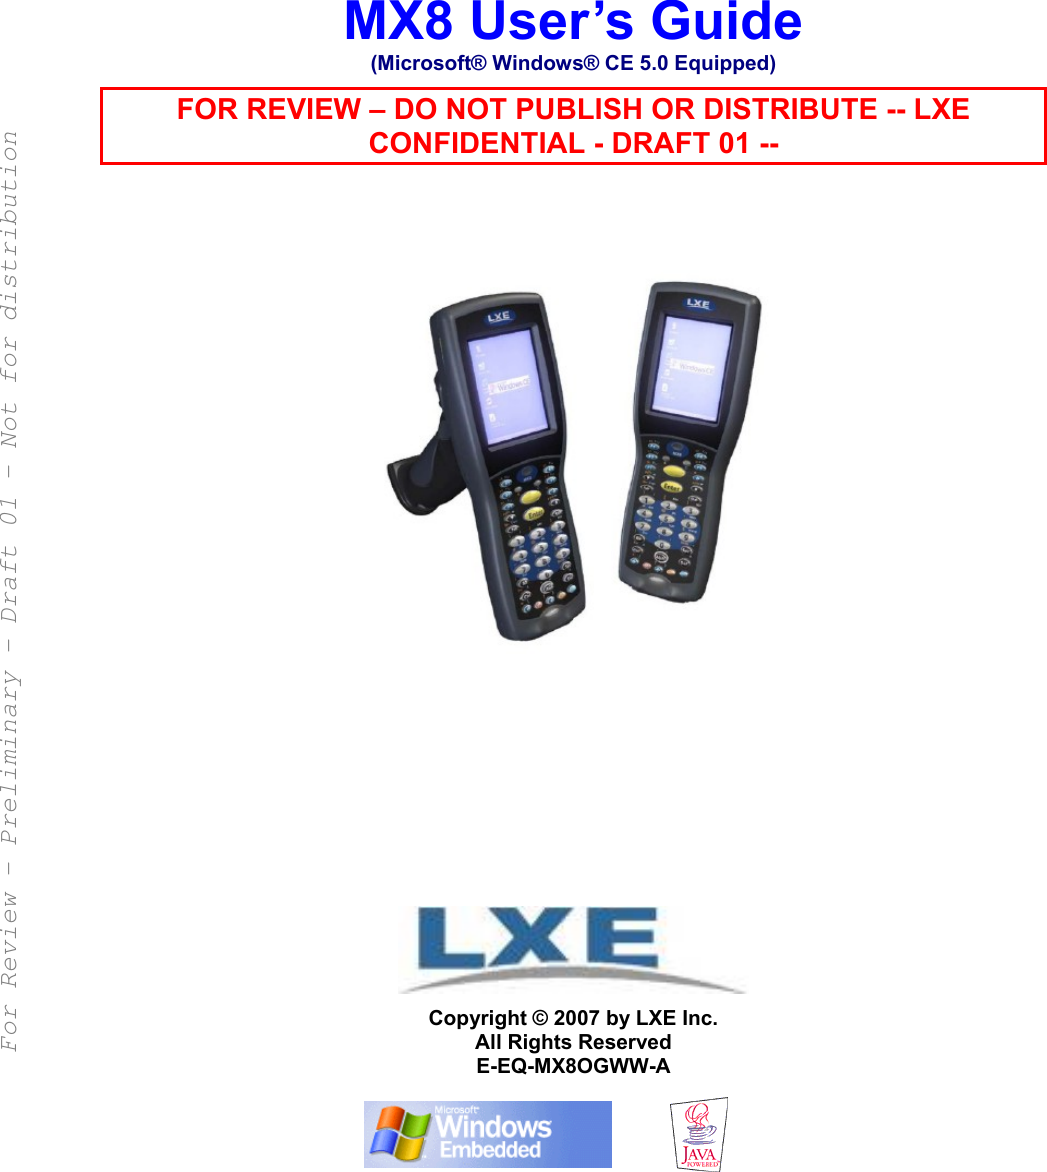  MX8 User’s Guide (Microsoft® Windows® CE 5.0 Equipped) FOR REVIEW – DO NOT PUBLISH OR DISTRIBUTE -- LXE CONFIDENTIAL - DRAFT 01 --                      Copyright © 2007 by LXE Inc. All Rights Reserved E-EQ-MX8OGWW-A    For Review - Preliminary - Draft 01 - Not for distribution 